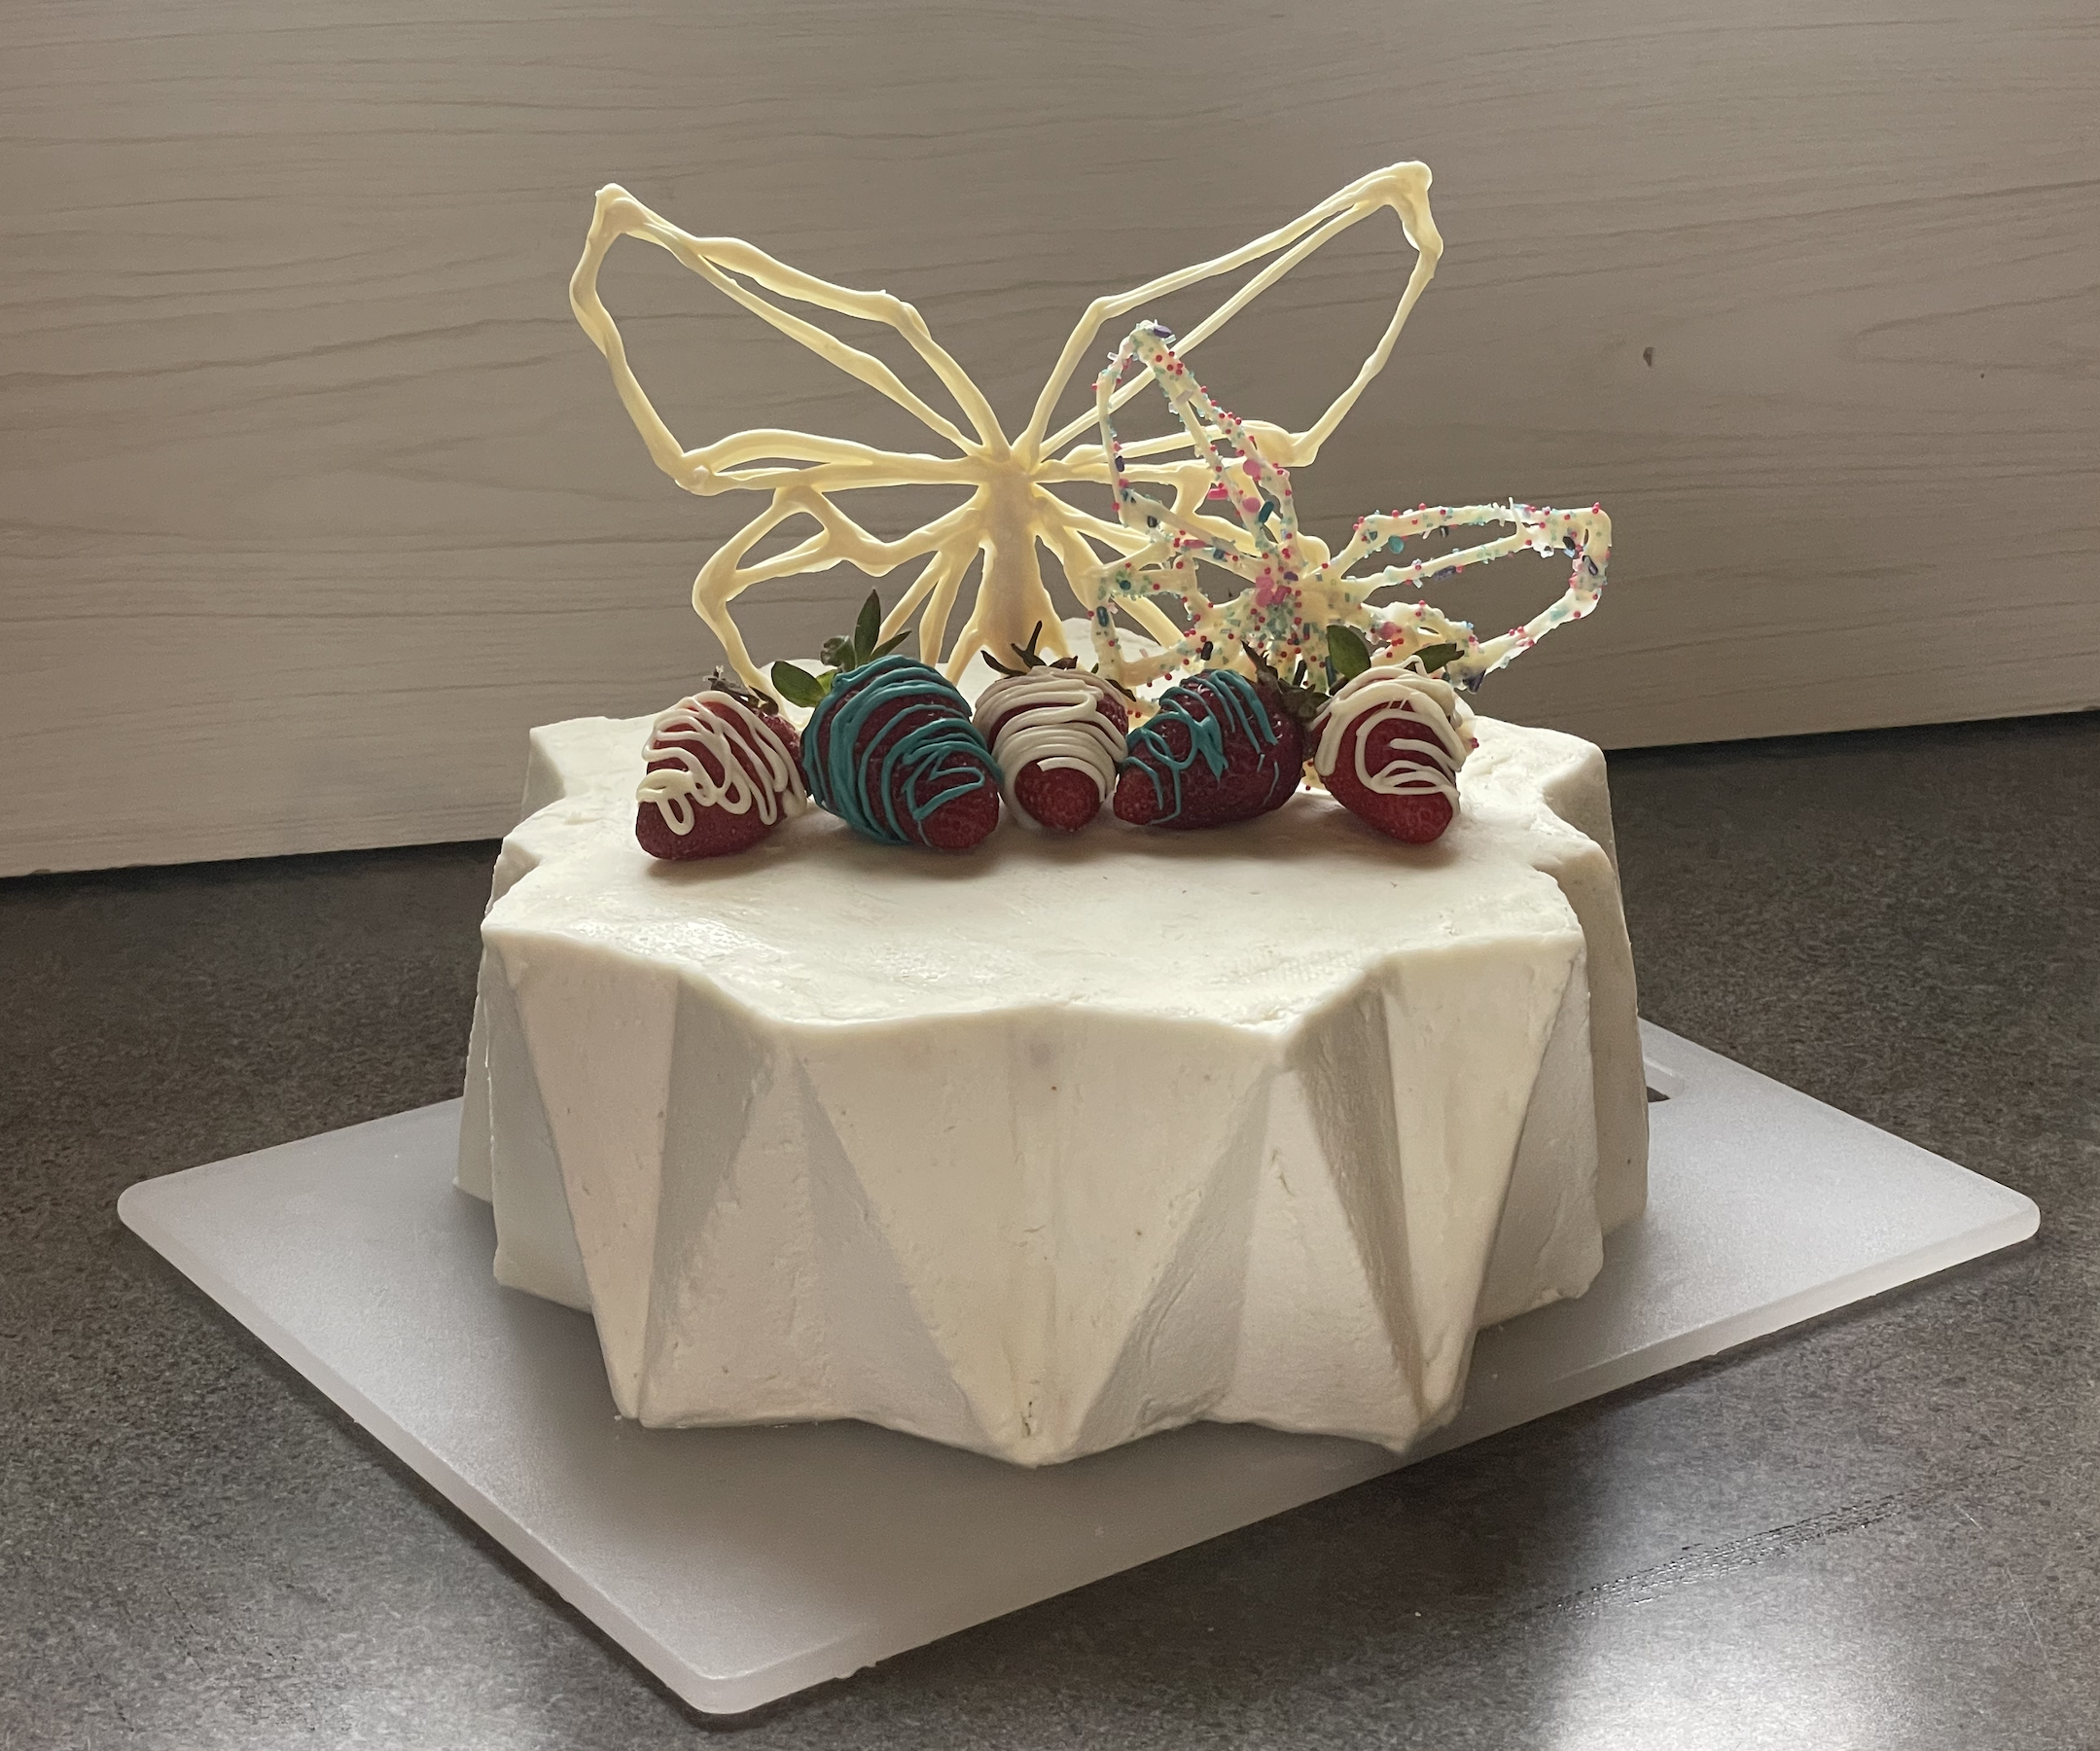 Origami Cake With Buttercream Frosting